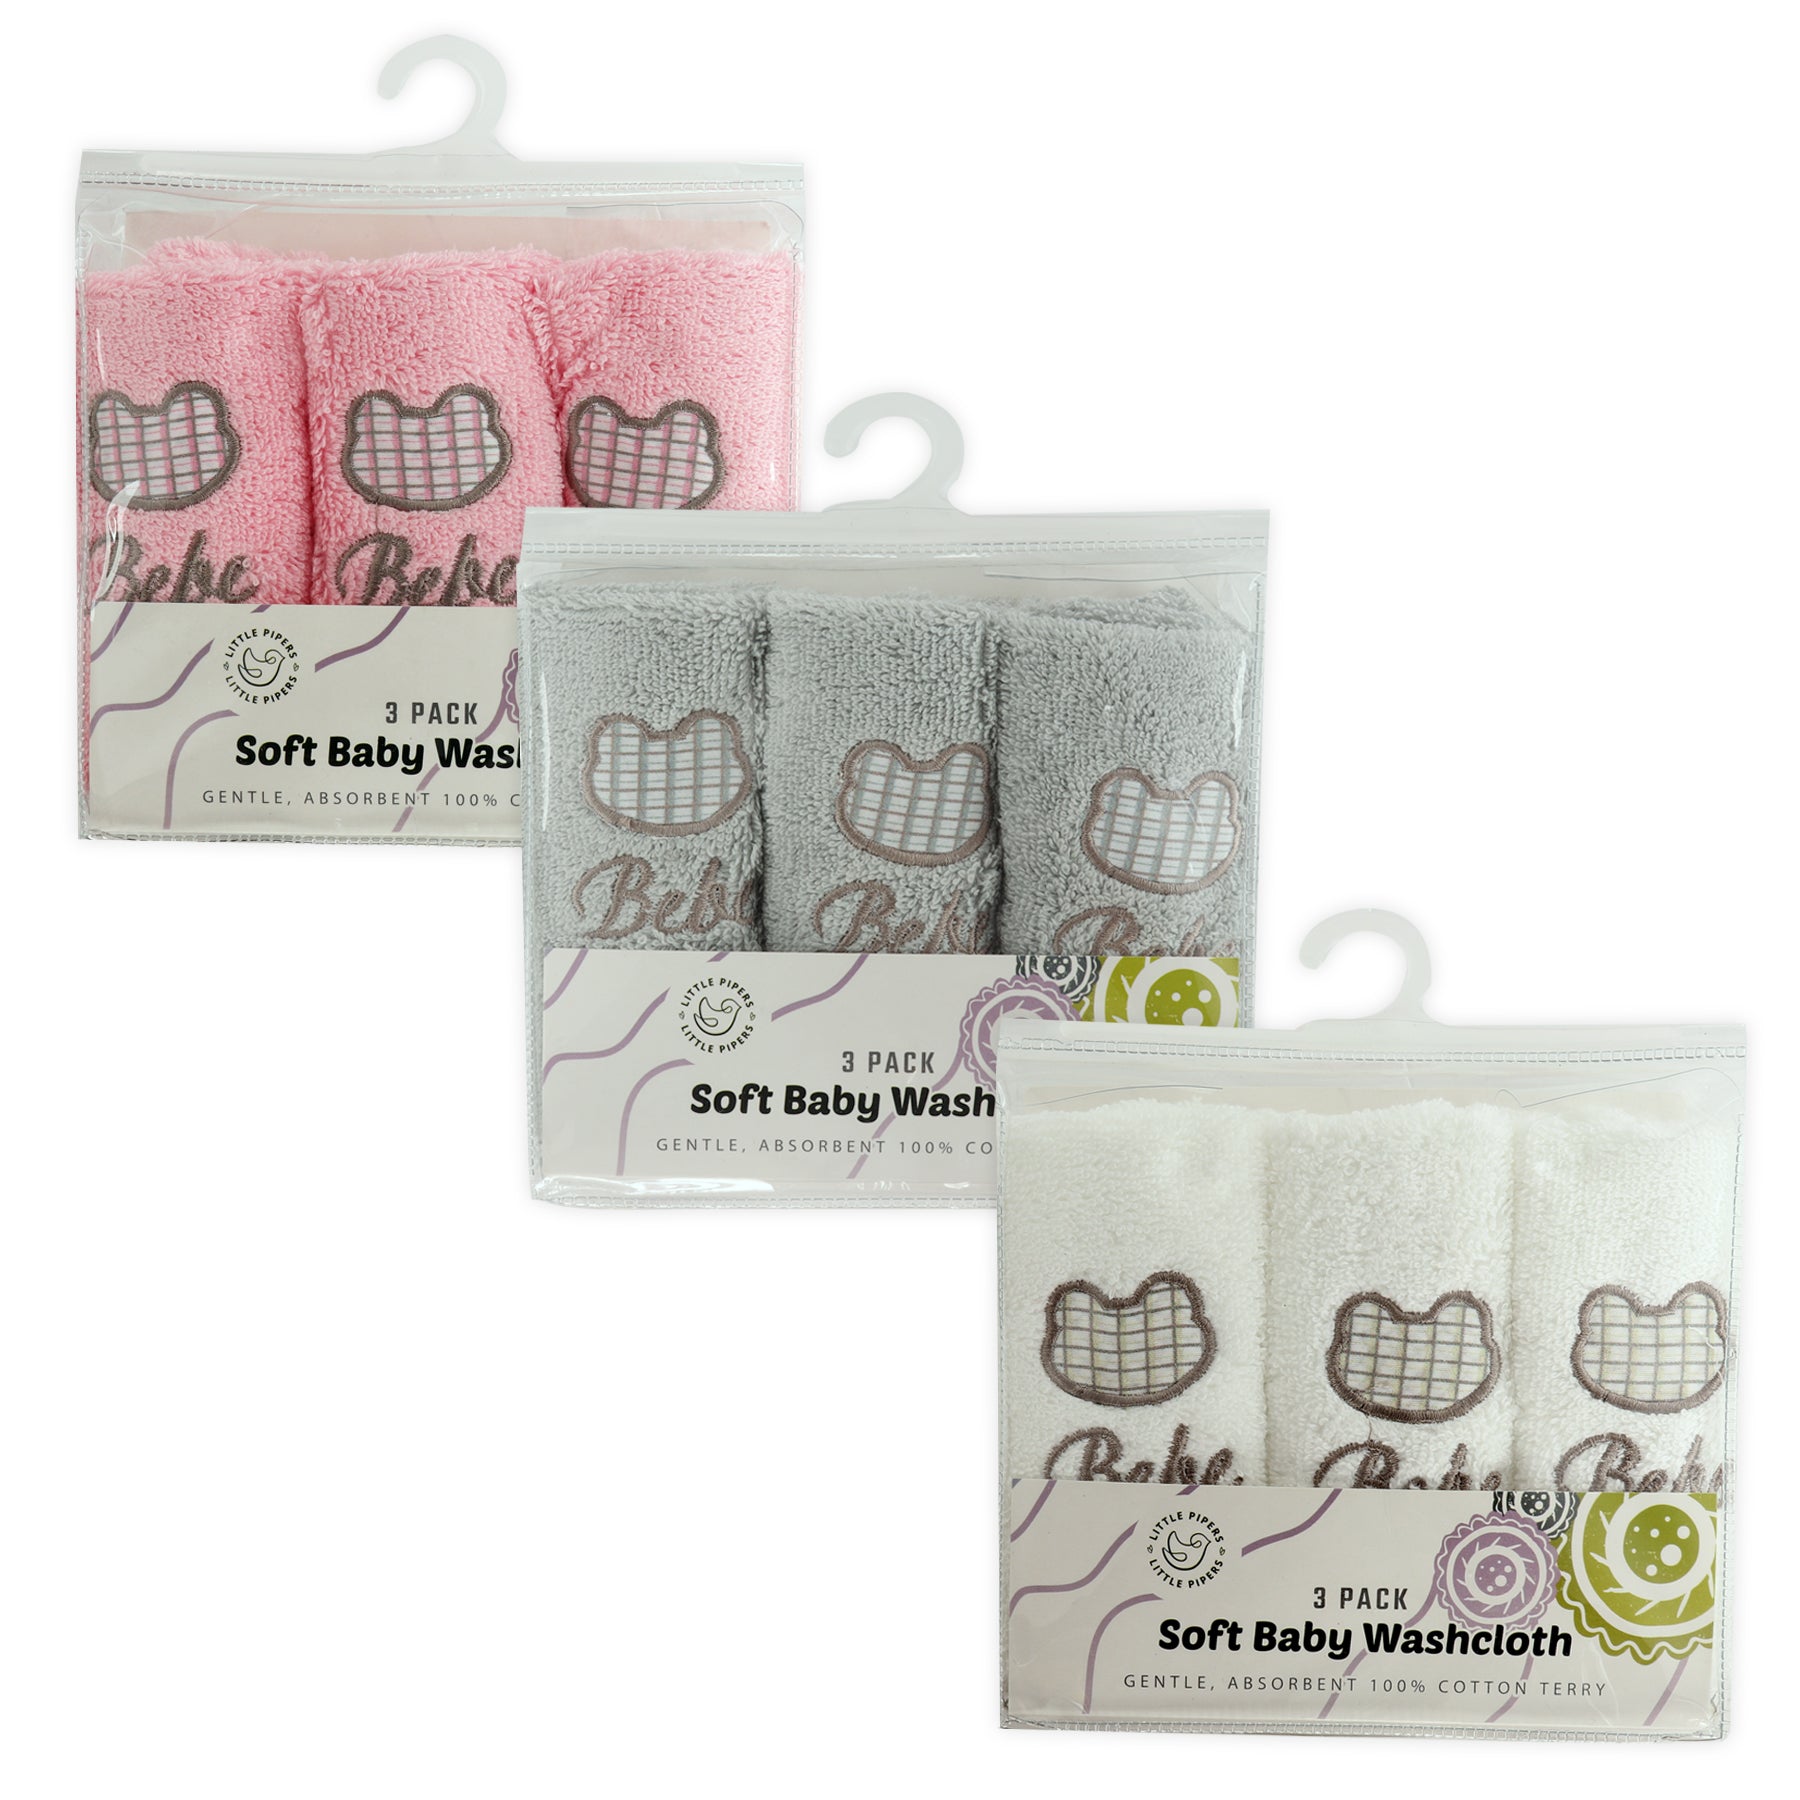 Soft Baby Wash Cloths 3 Pack